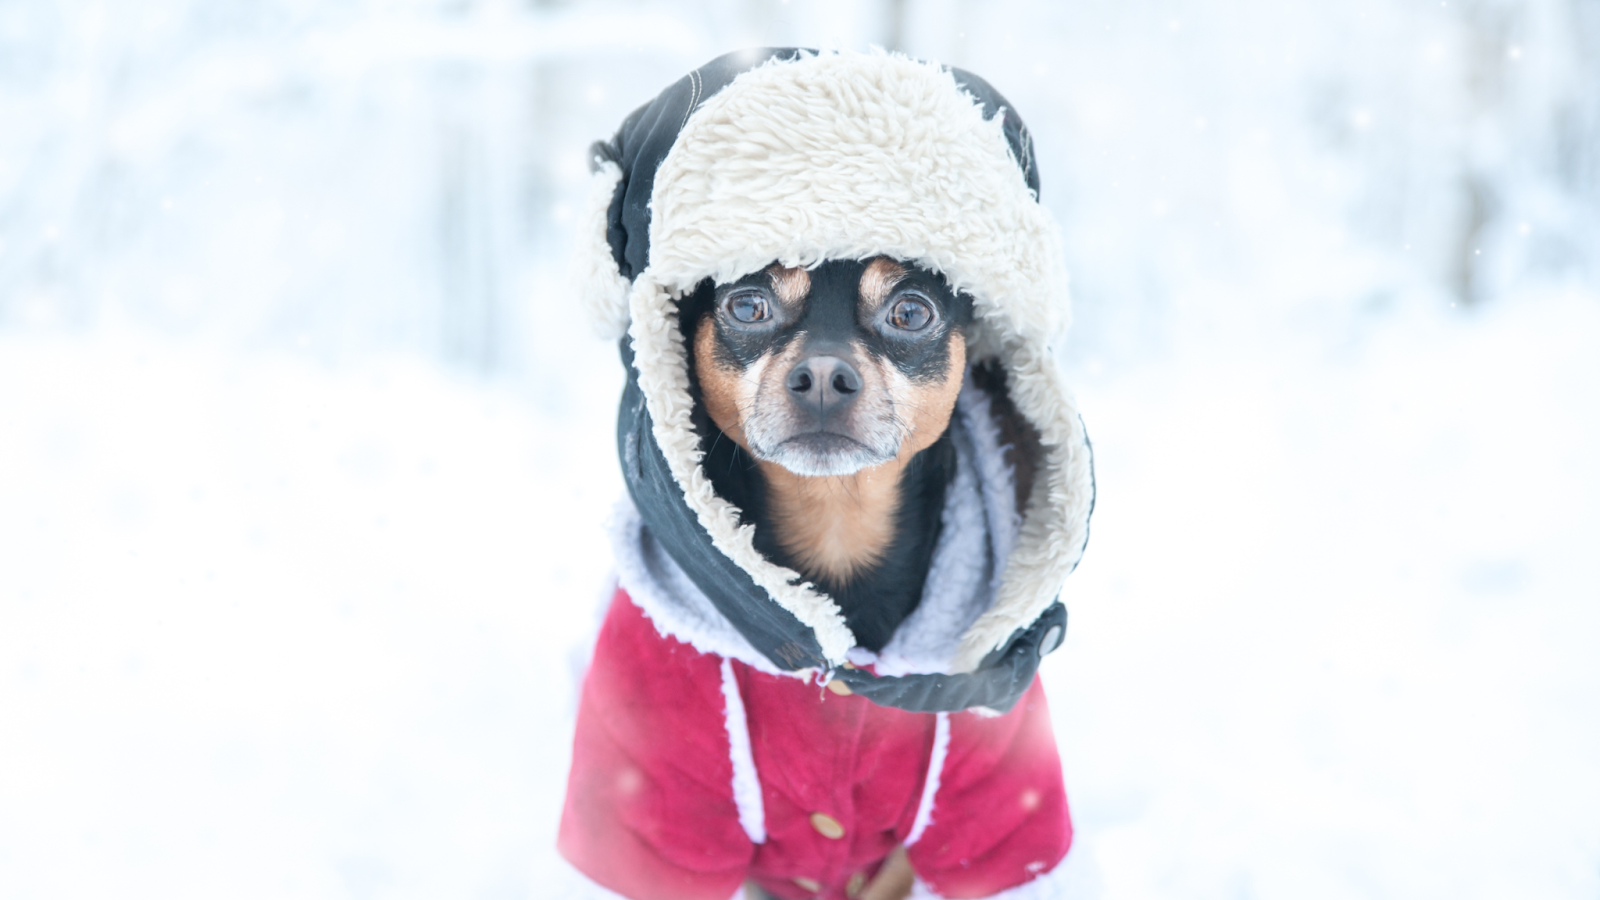 Invest in insulated dog gear to help protect from the cold weather. 